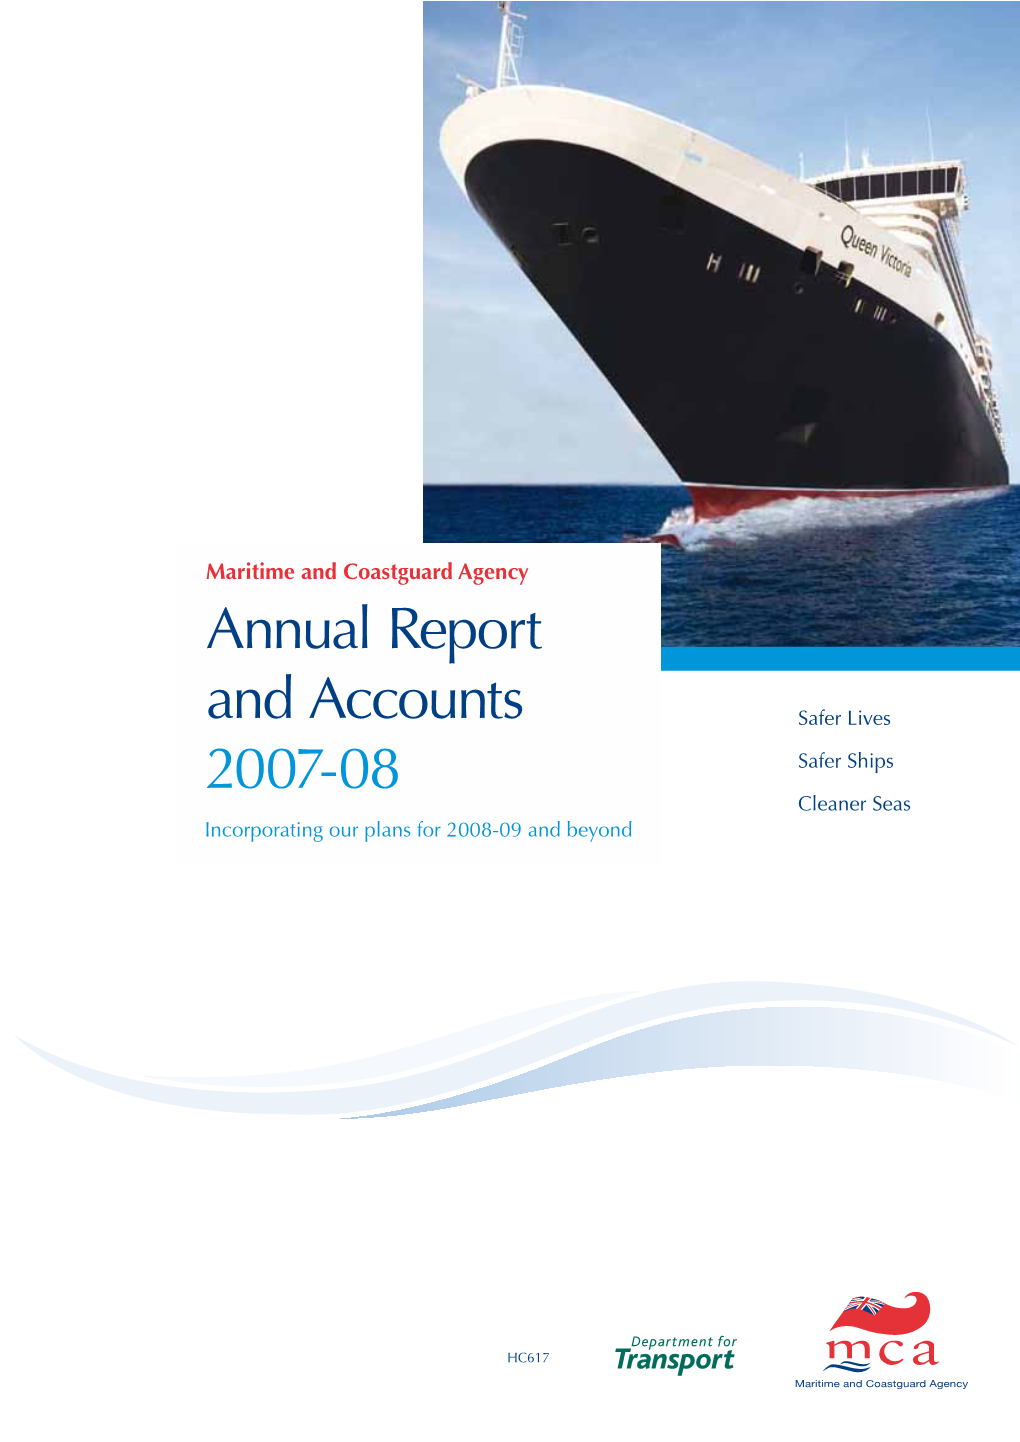 The Maritime and Coastguard Agency Annual Report and Accounts 2007-08